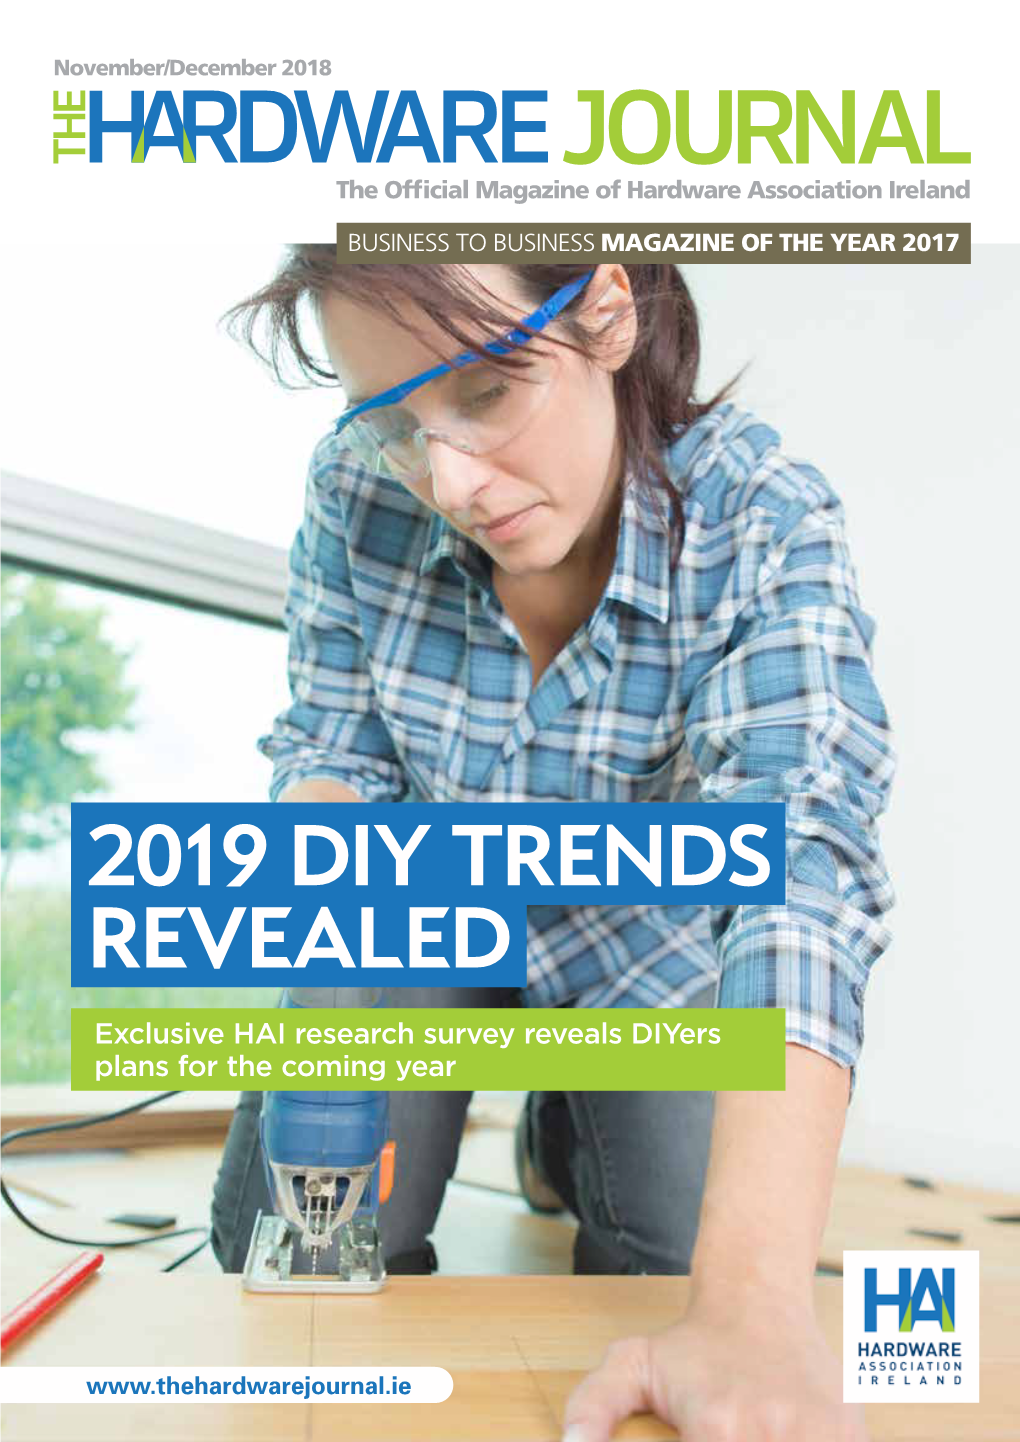 2019 DIY Trends Revealed Exclusive HAI Research Survey Reveals Diyers Plans for the Coming Year November/December 2018